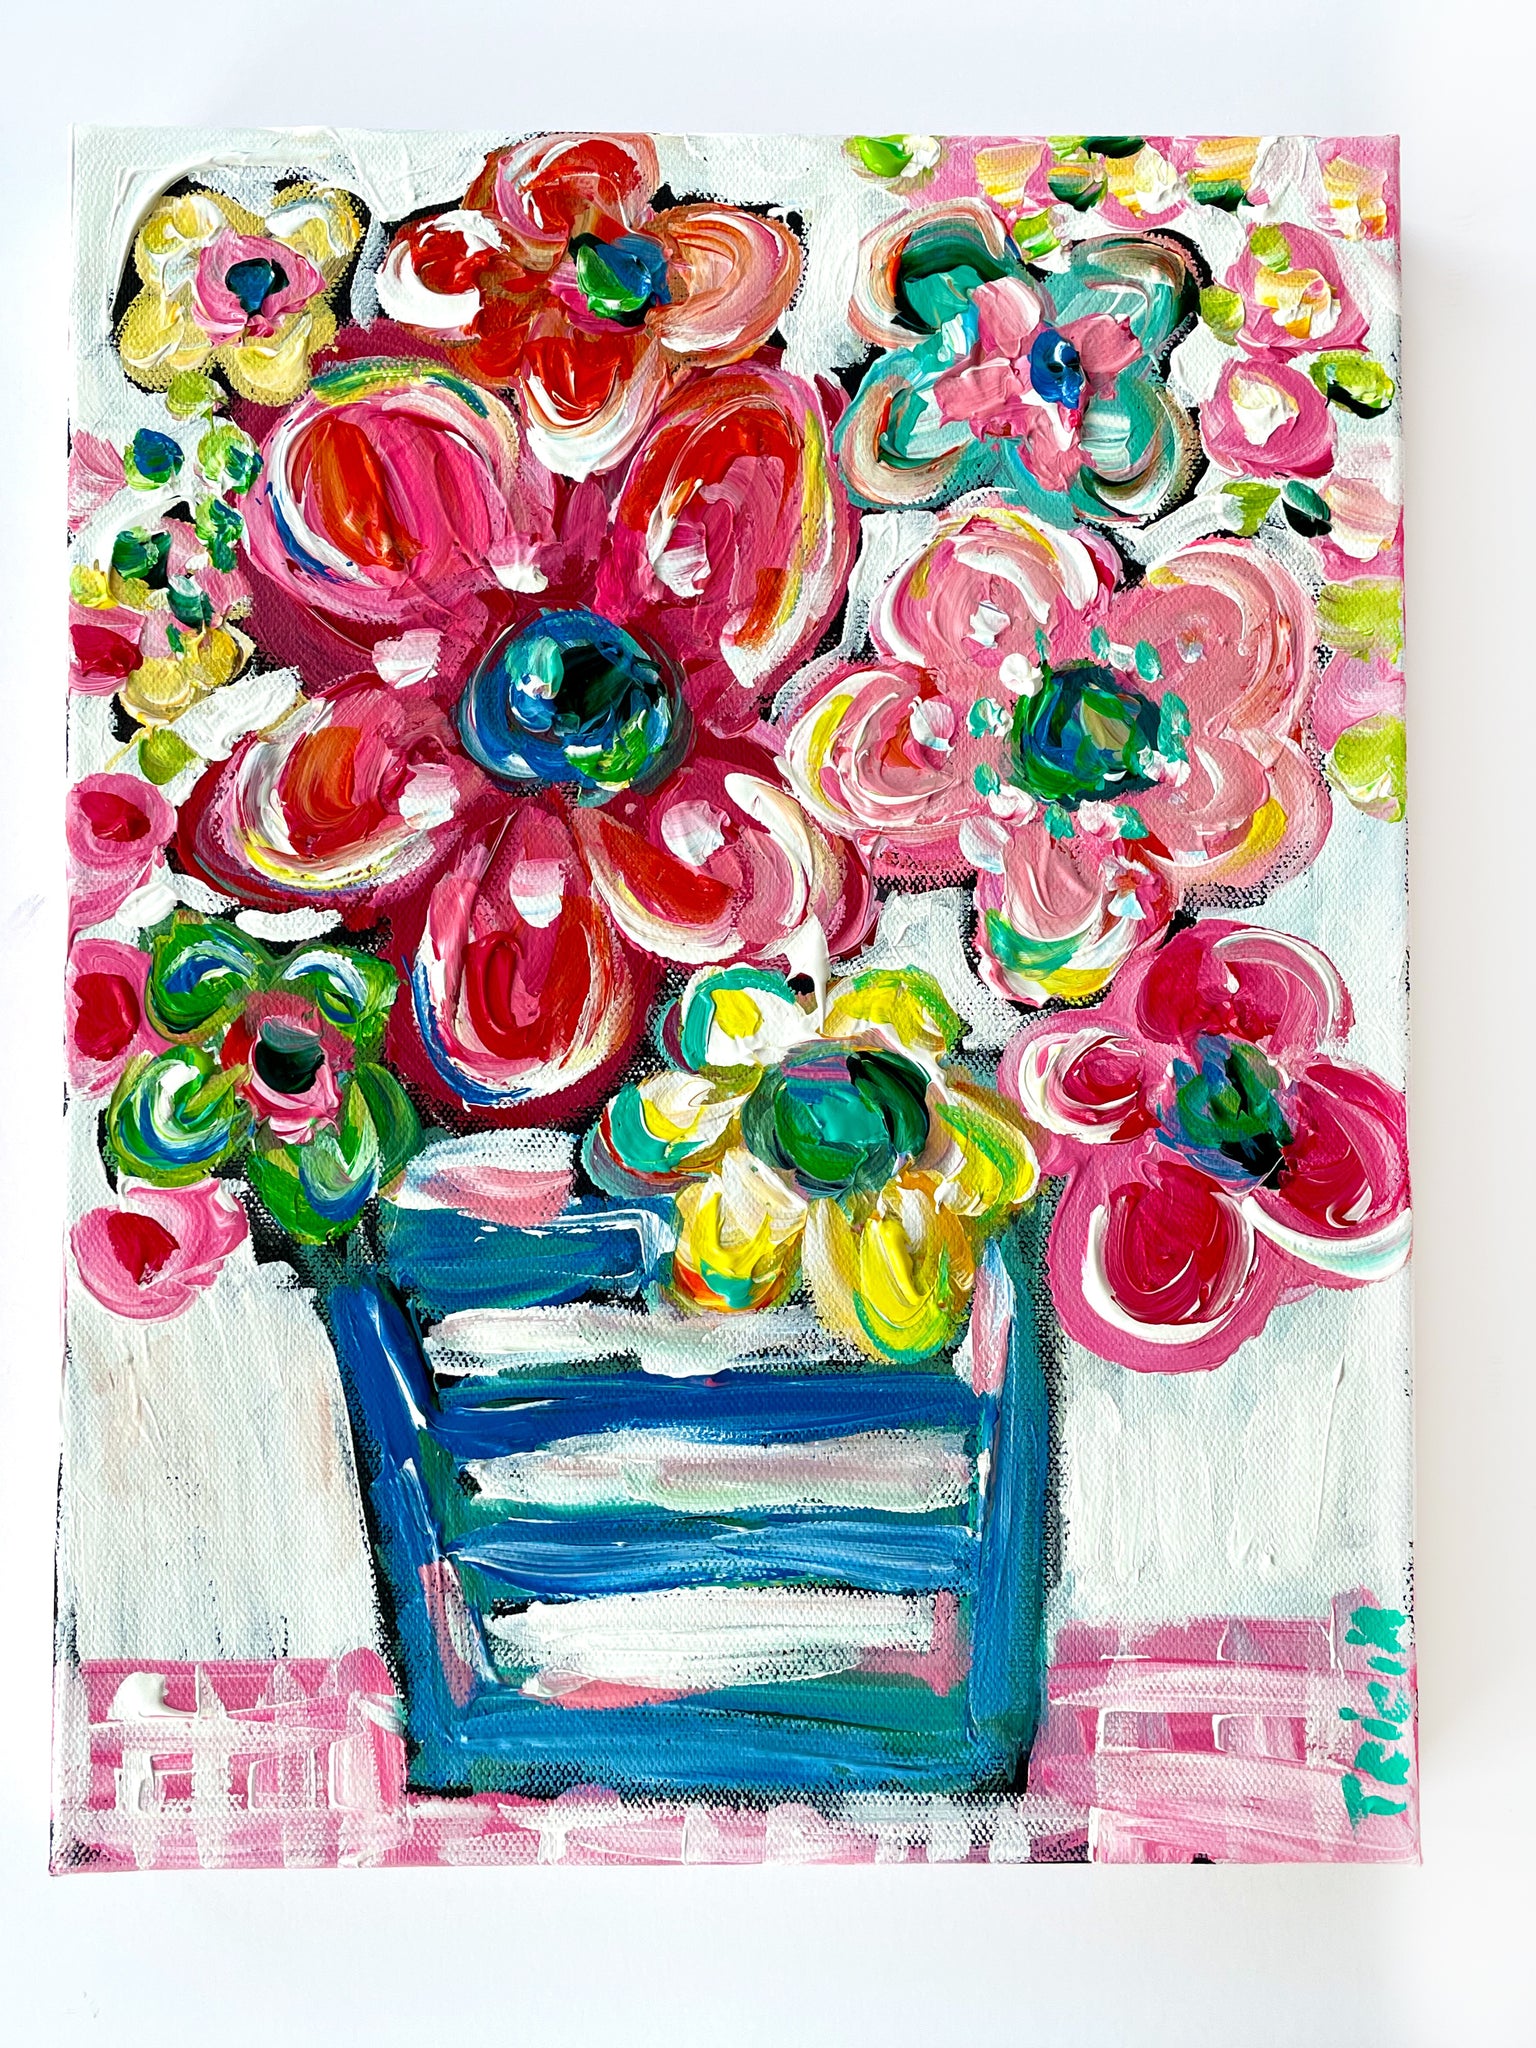 “Mary Poppins Flowers” 11"x14" Original Painting